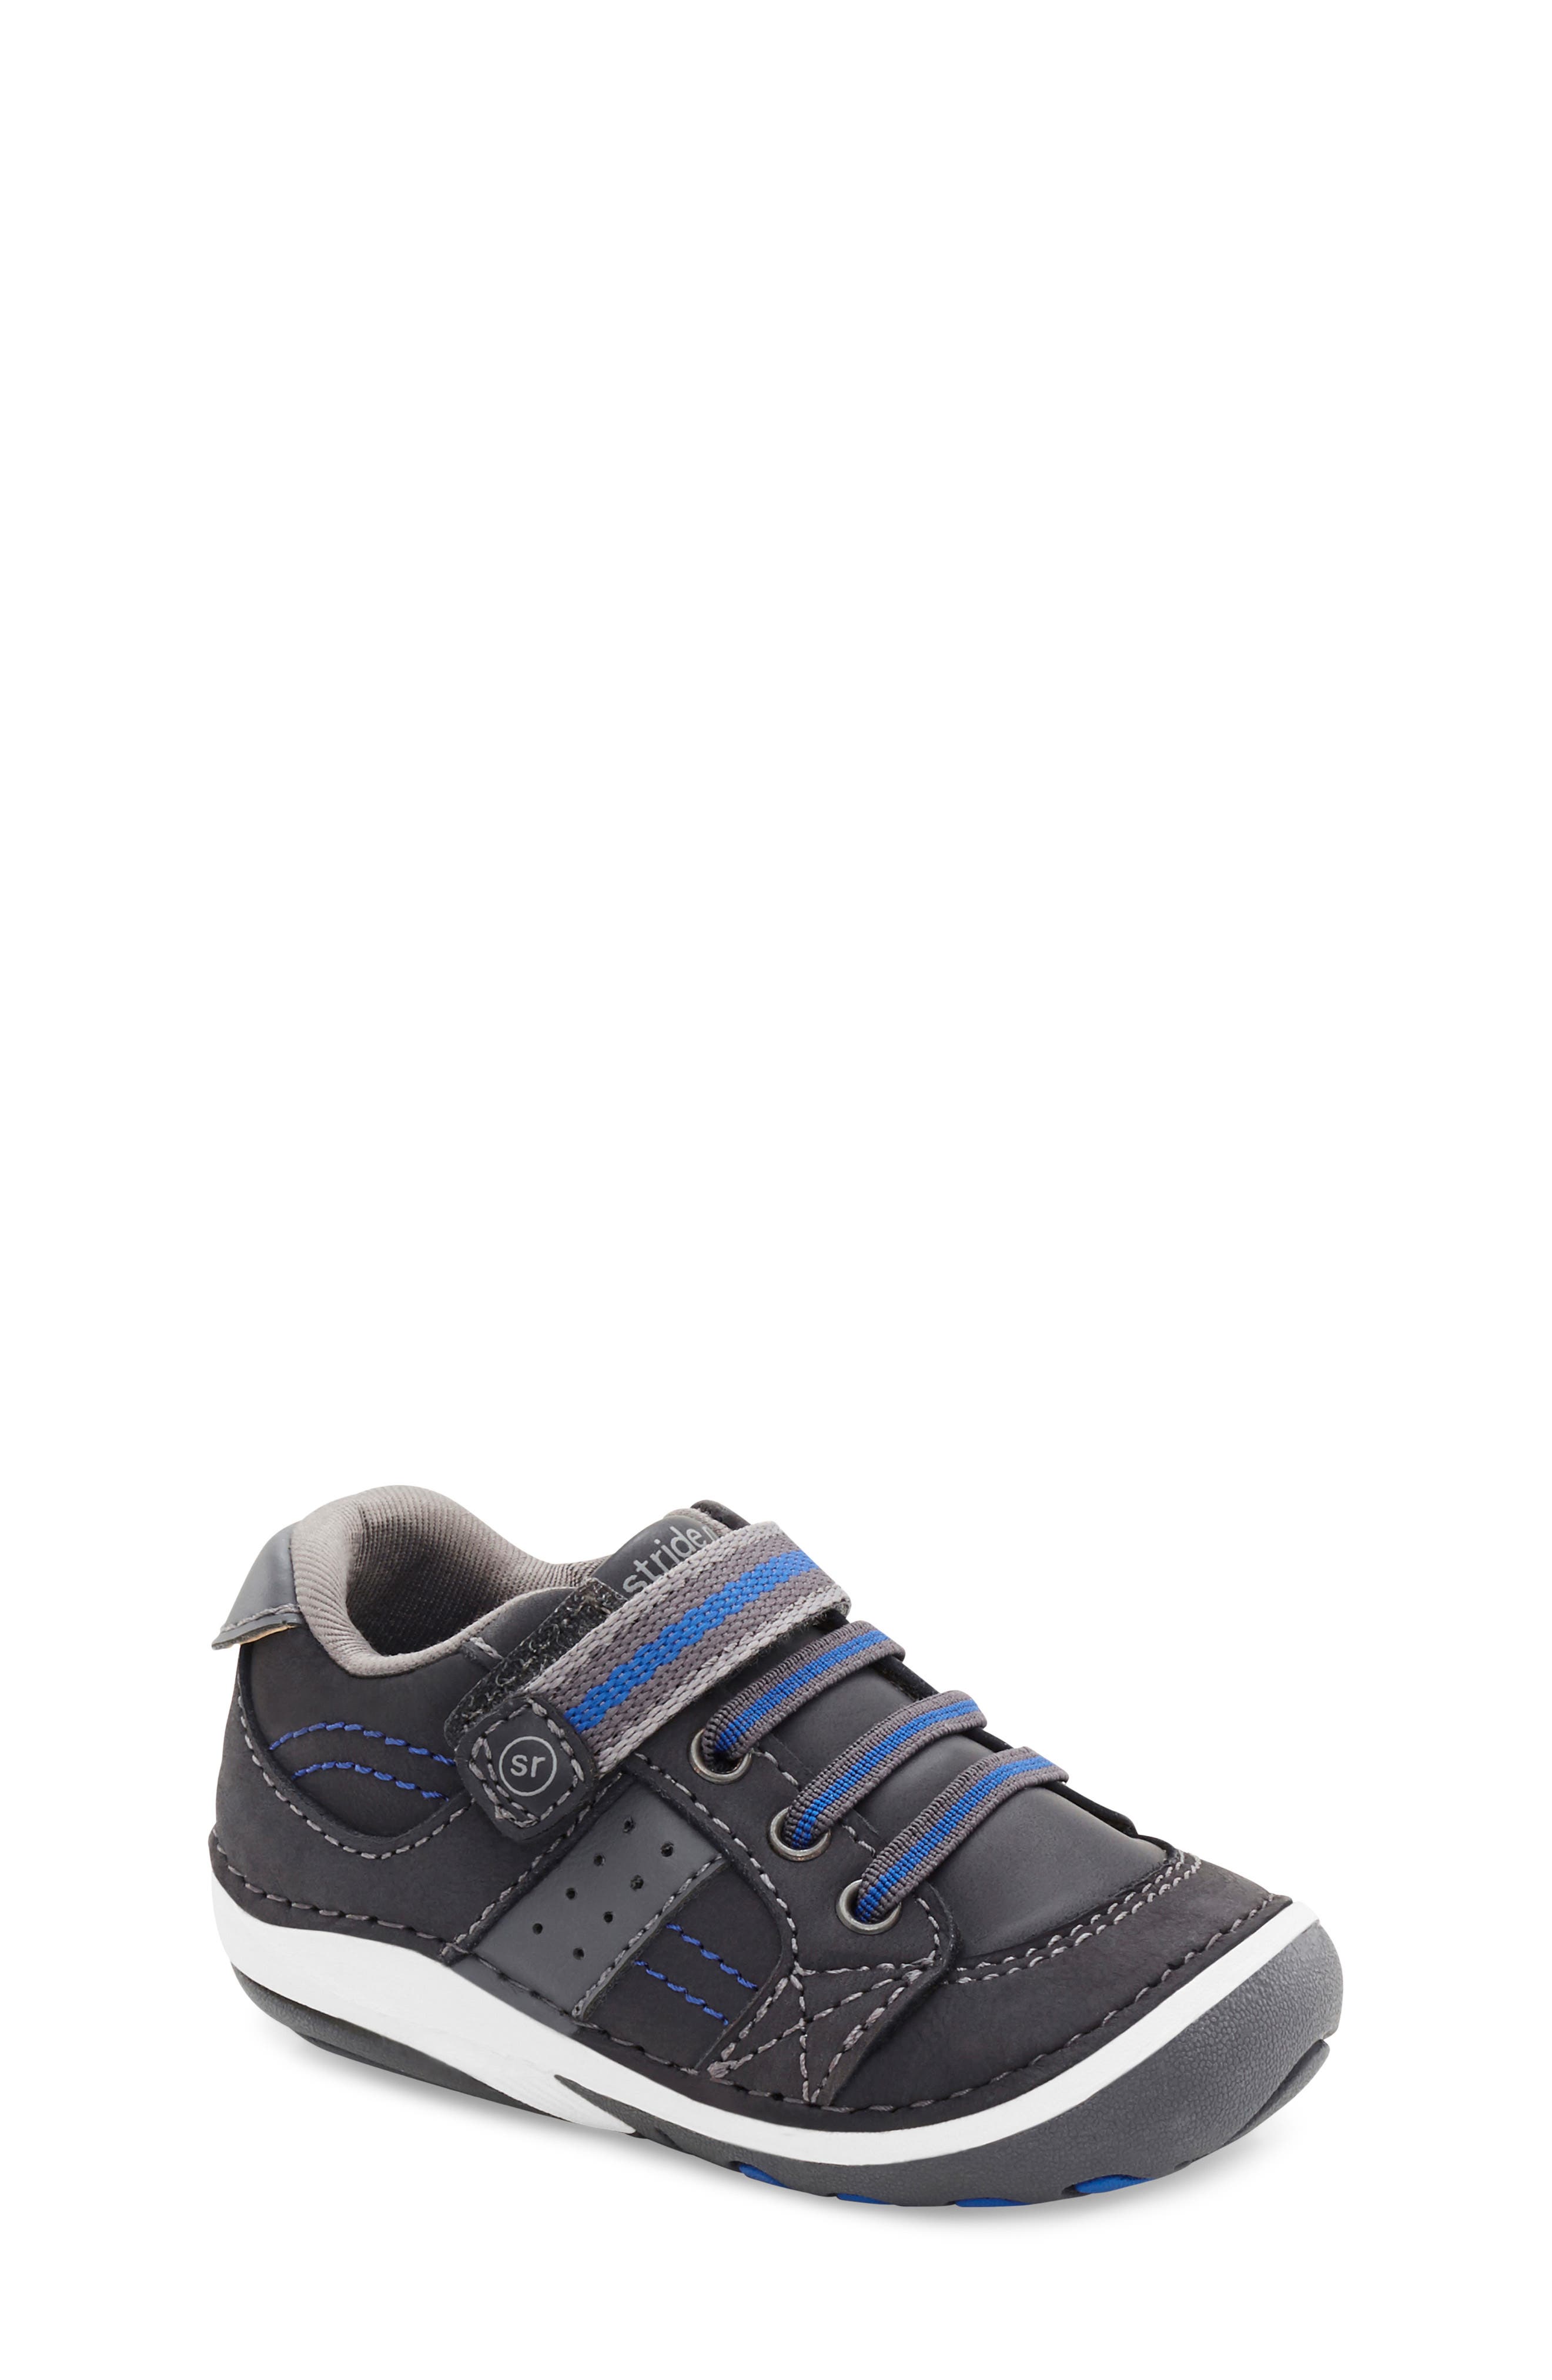 Stride Rite Soft Motion Baby and Toddler Boys Artie Athletic Sneaker 